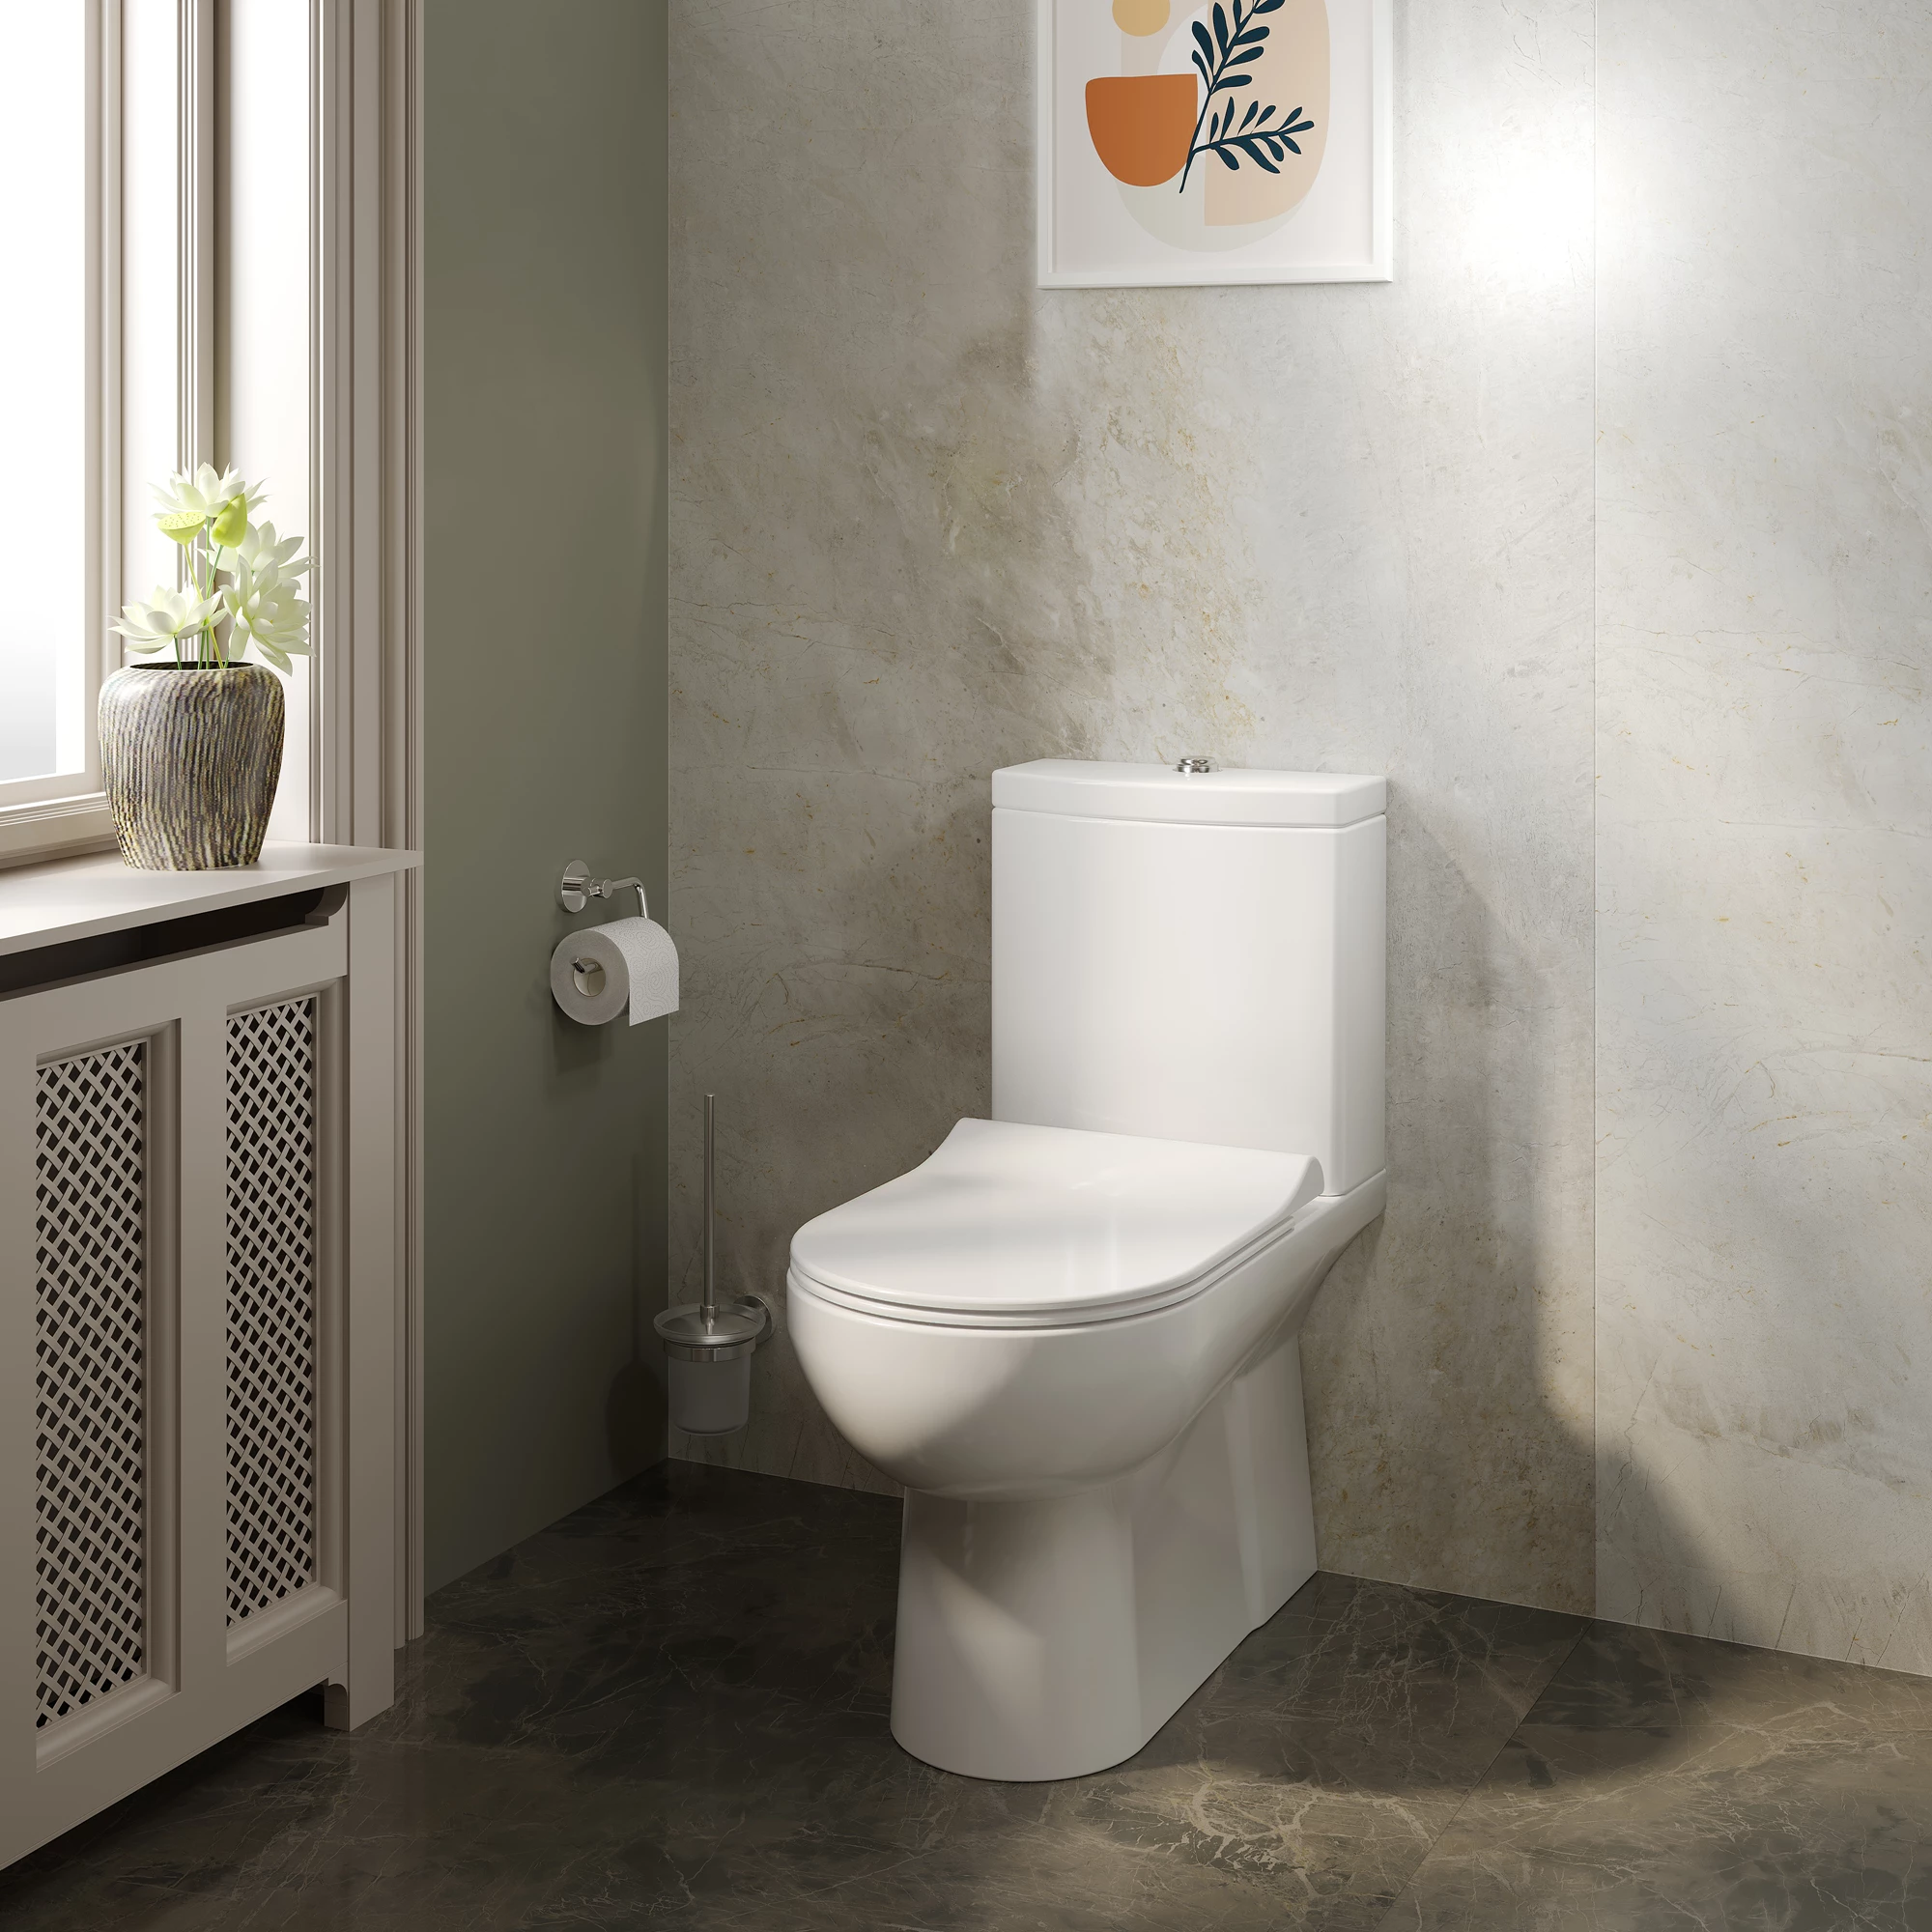 İdea 2.0 Rimless Smart Wall Hung WC With Bidet Function